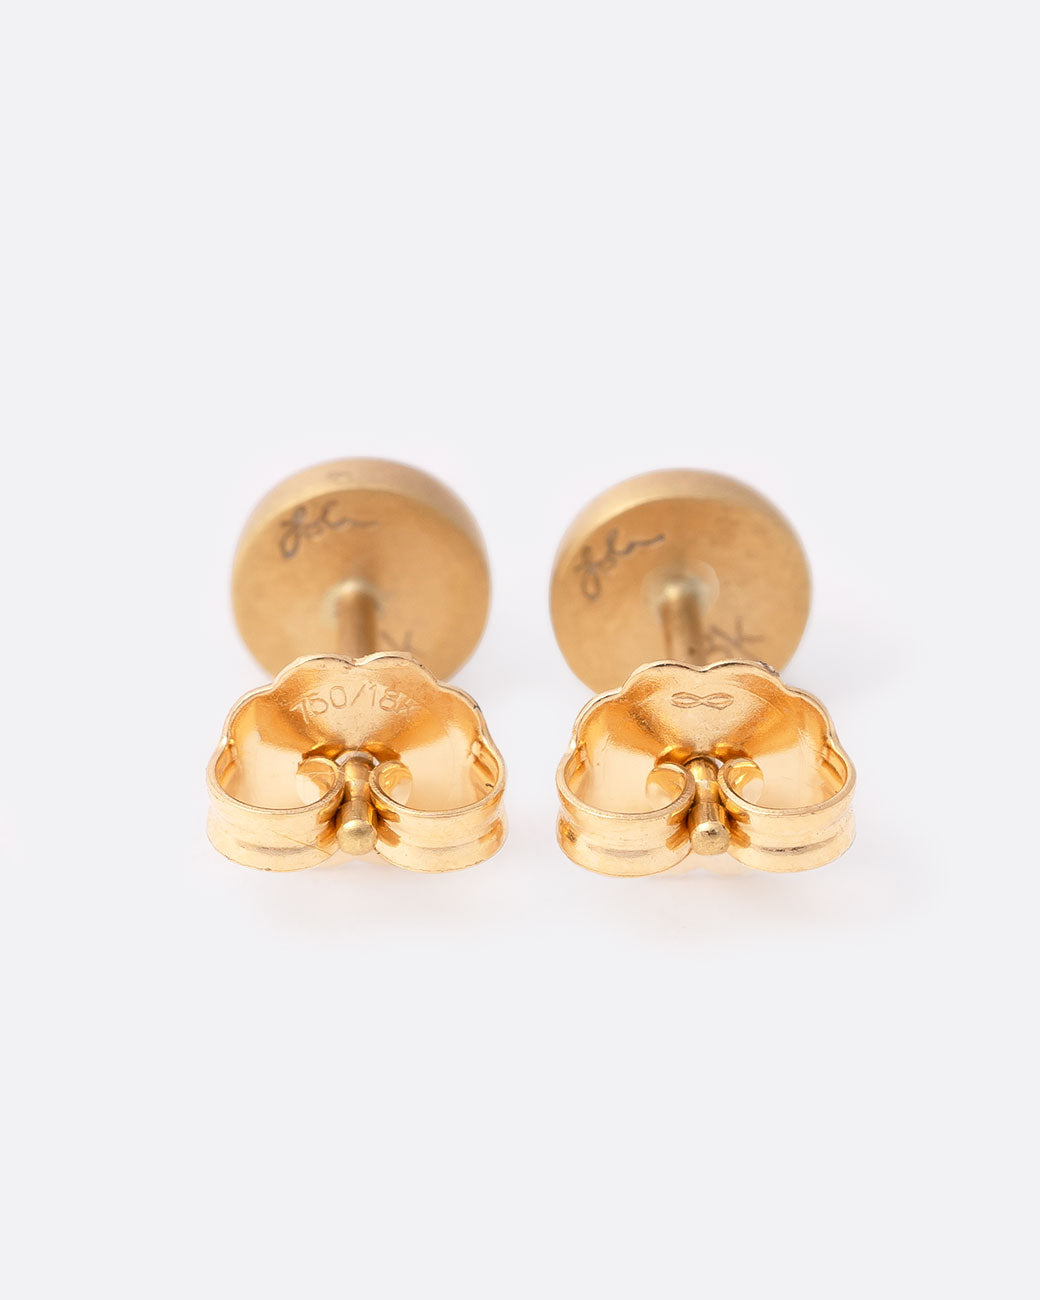 18k yellow gold stud earrings with gray diamond cabochons by Lola Brooks, shown from the back.